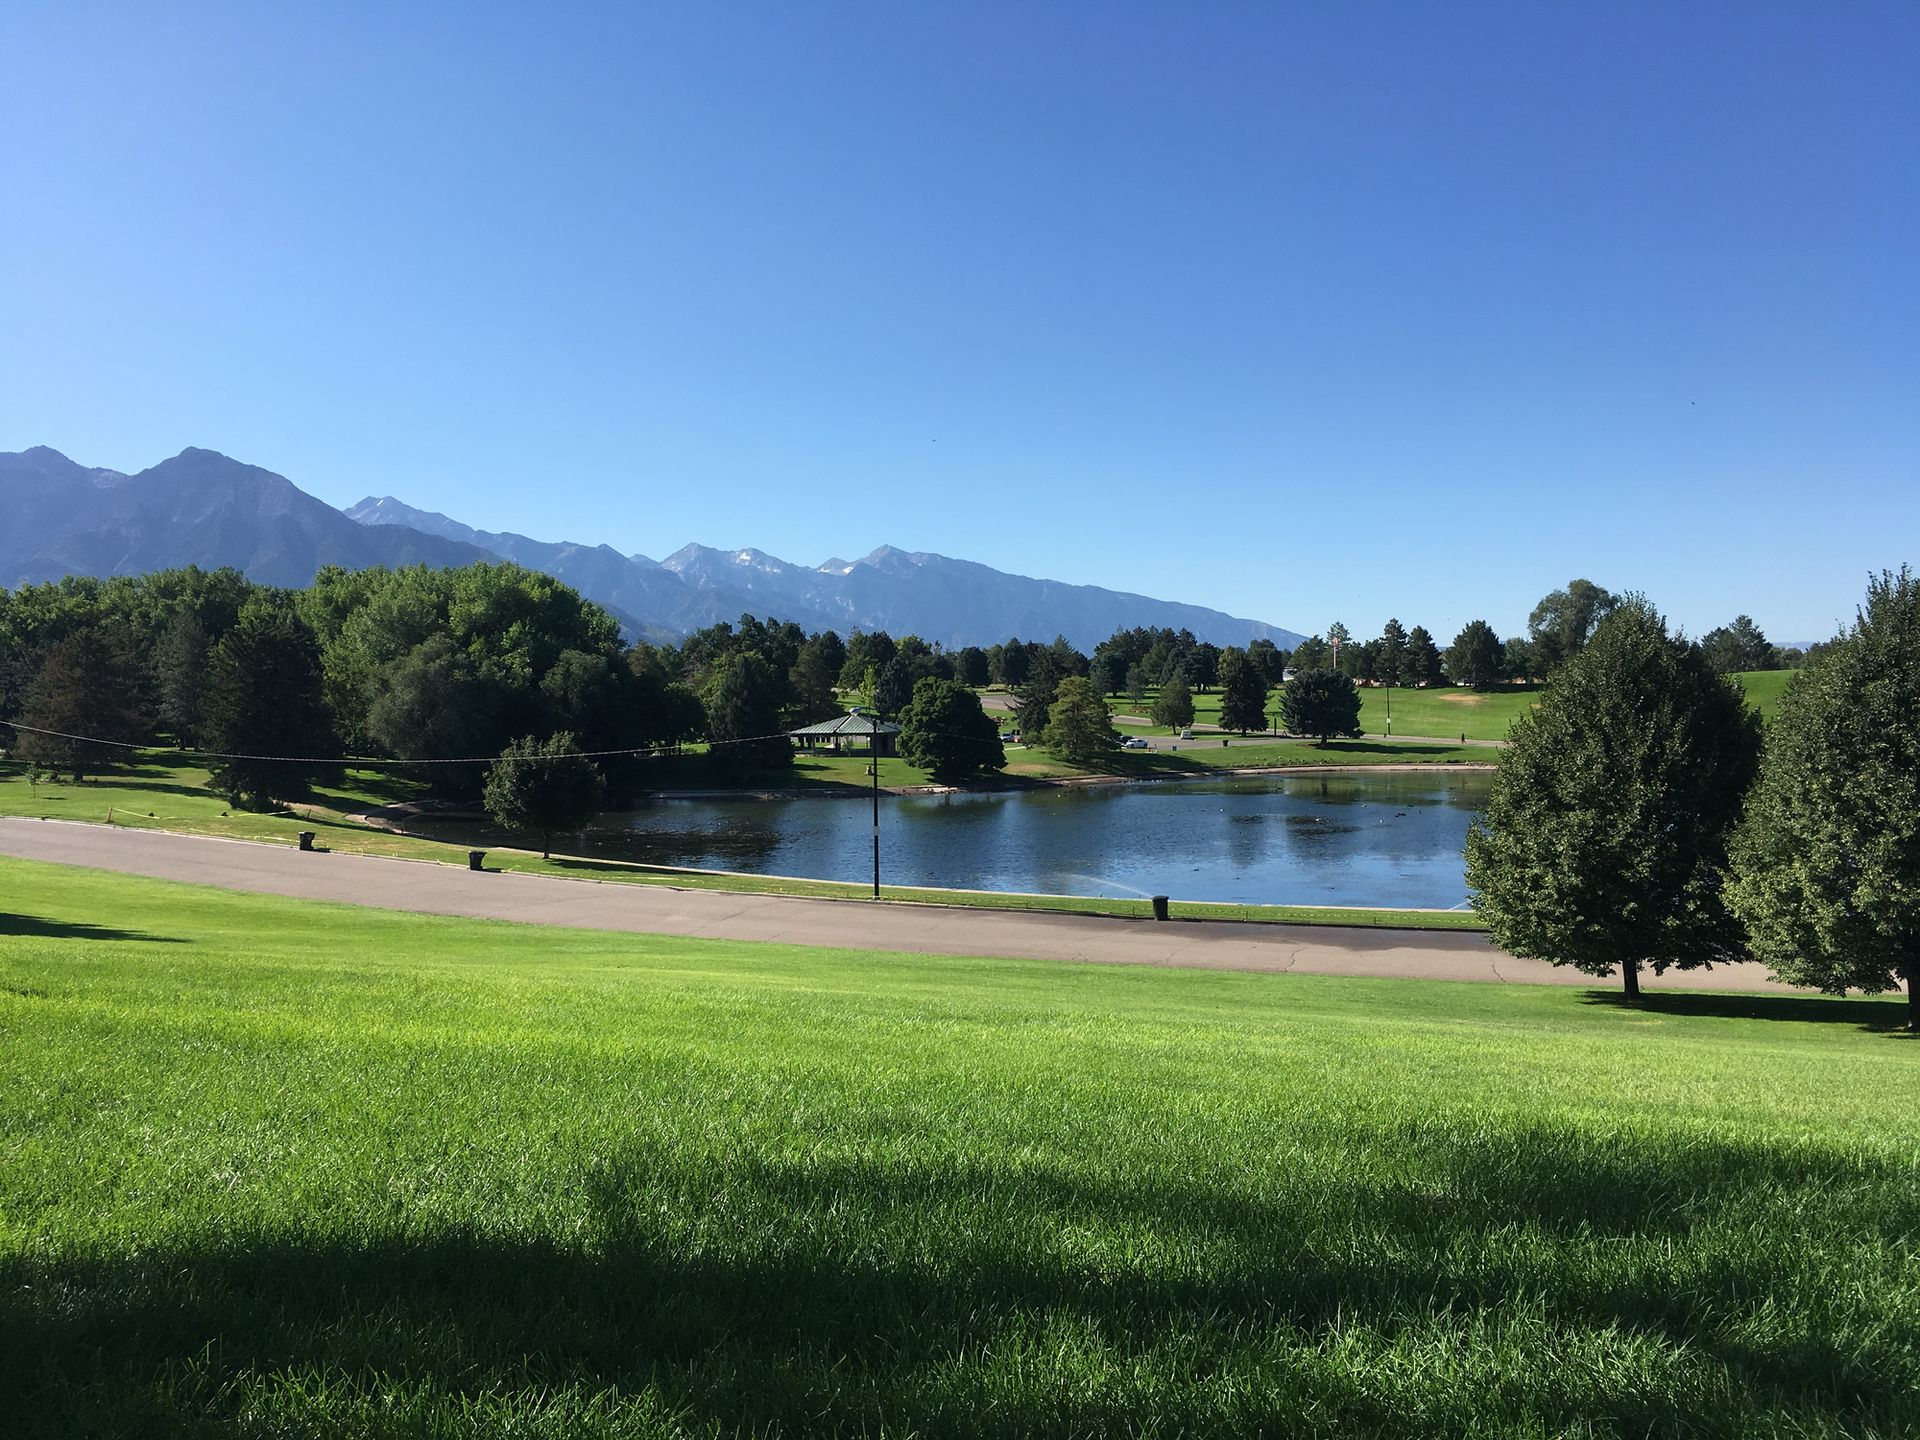 there is a lake in the middle of a park with mountains in the background .